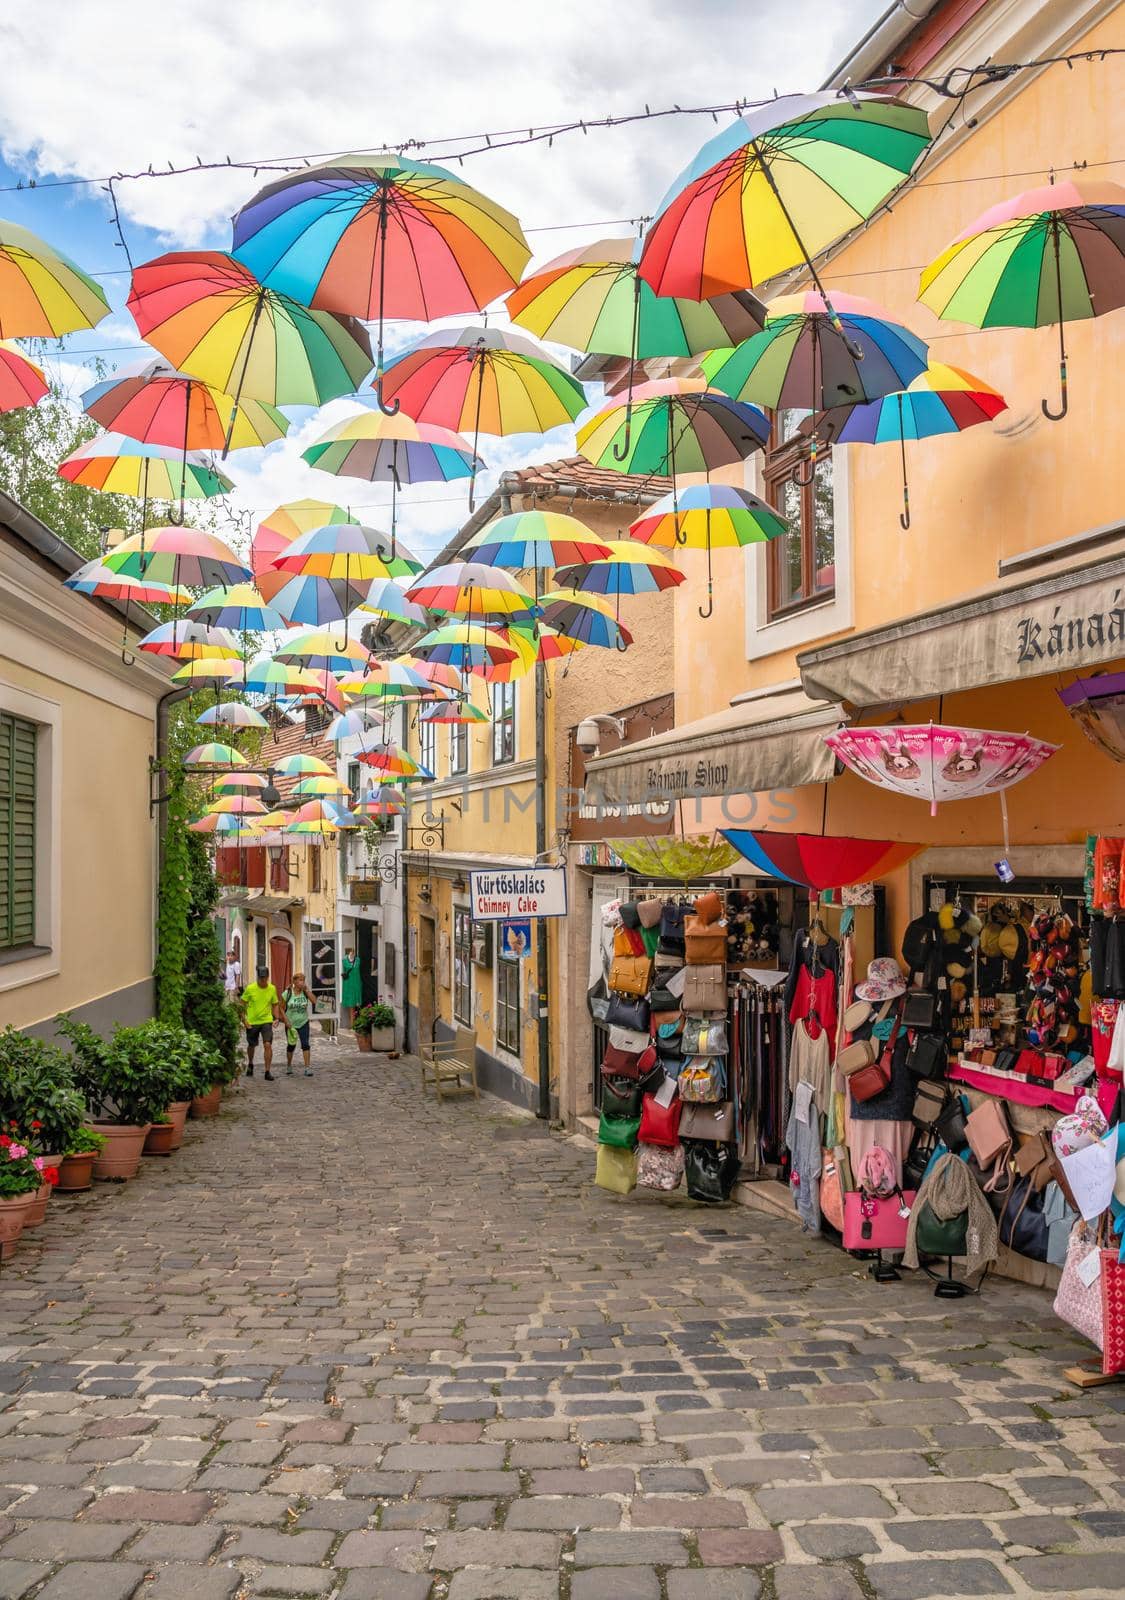 Streets of the old town of Szentendre, Hungary by Multipedia